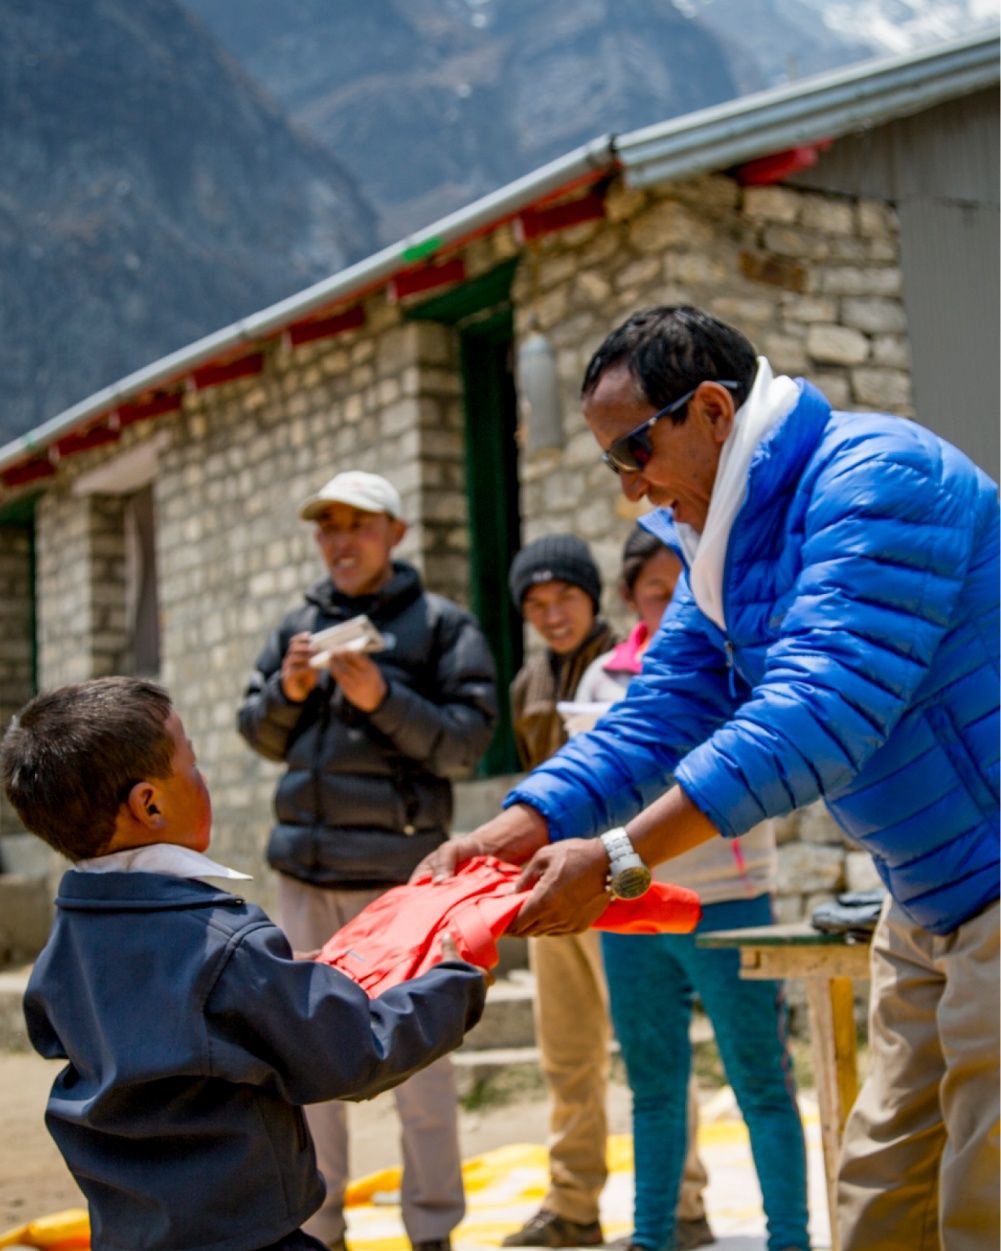 Apa Sherpa hands a red backpack to a child in a village.